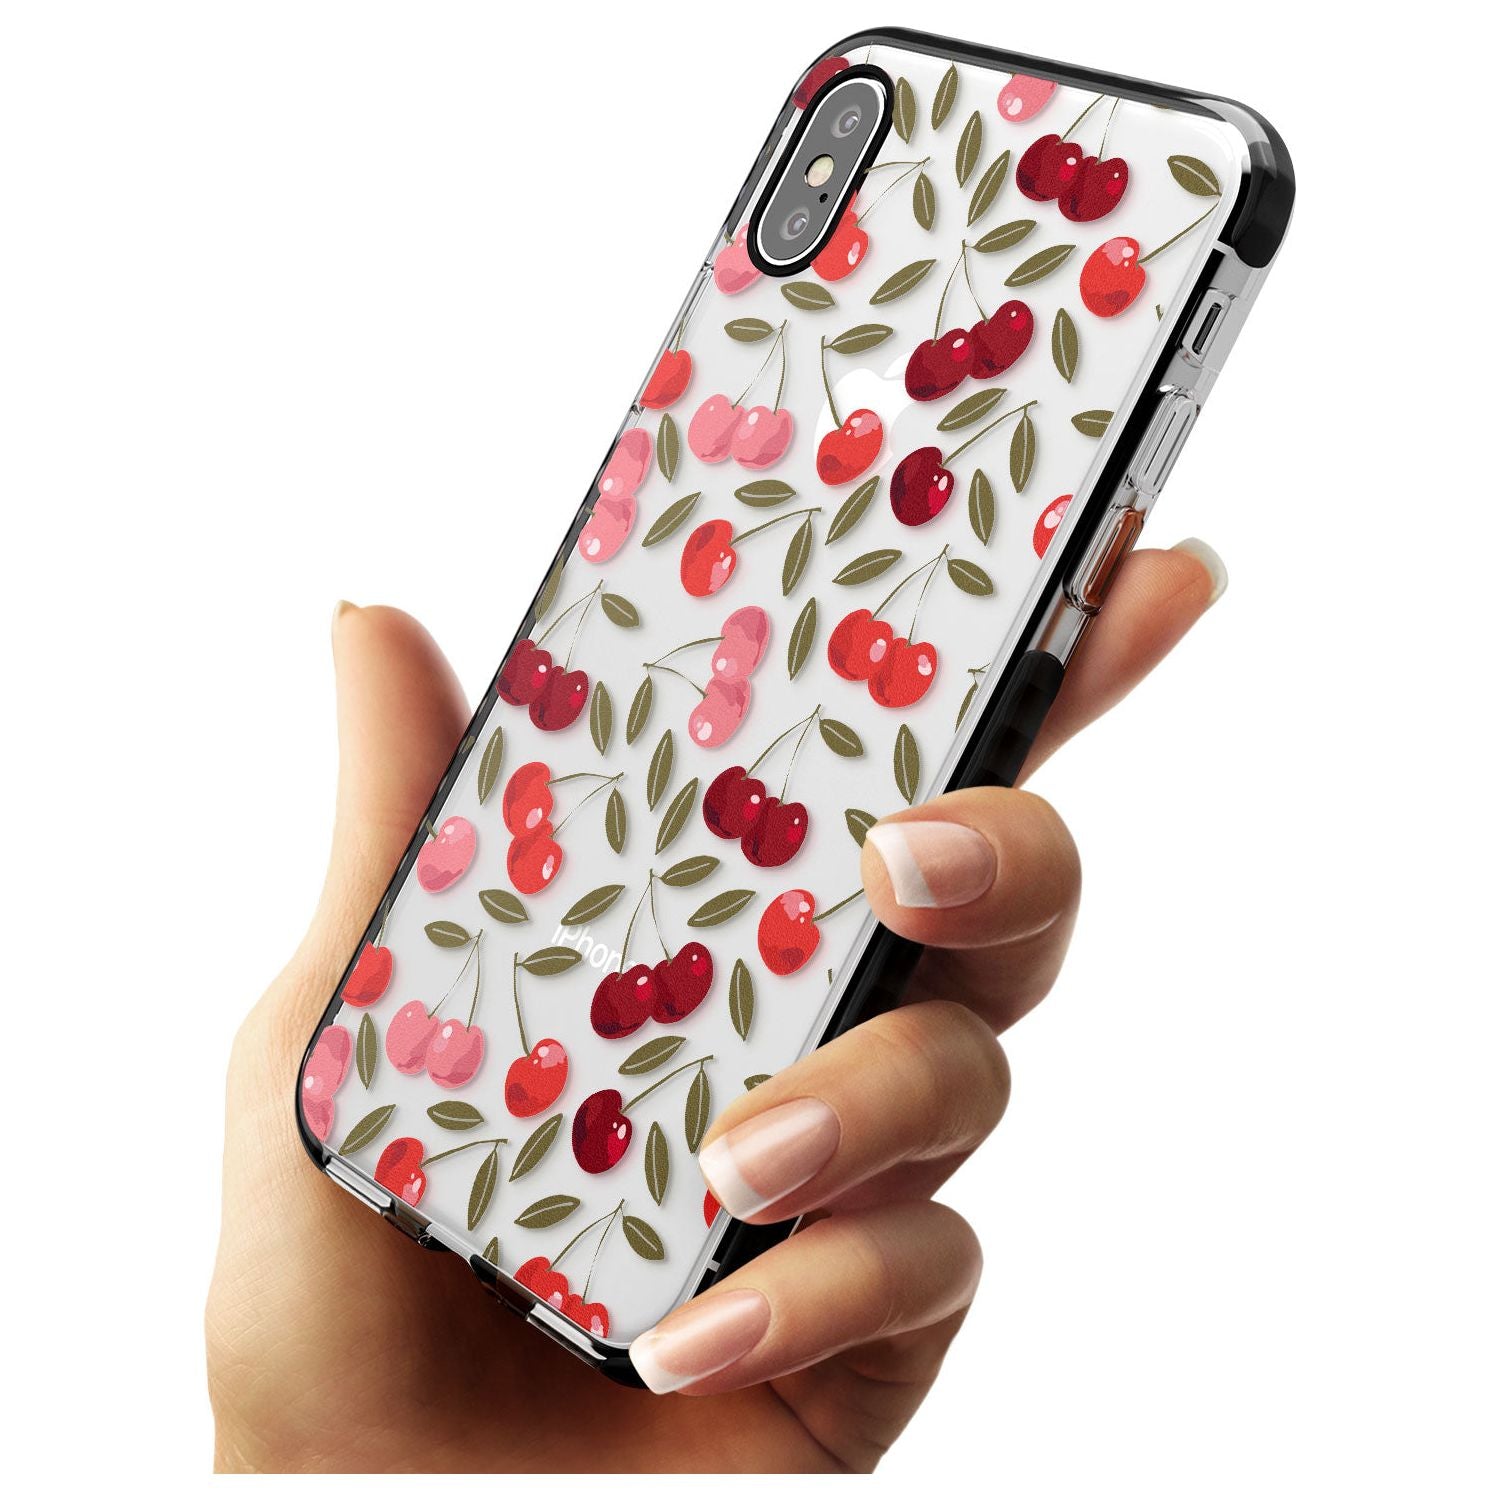 Cherry on top Black Impact Phone Case for iPhone X XS Max XR